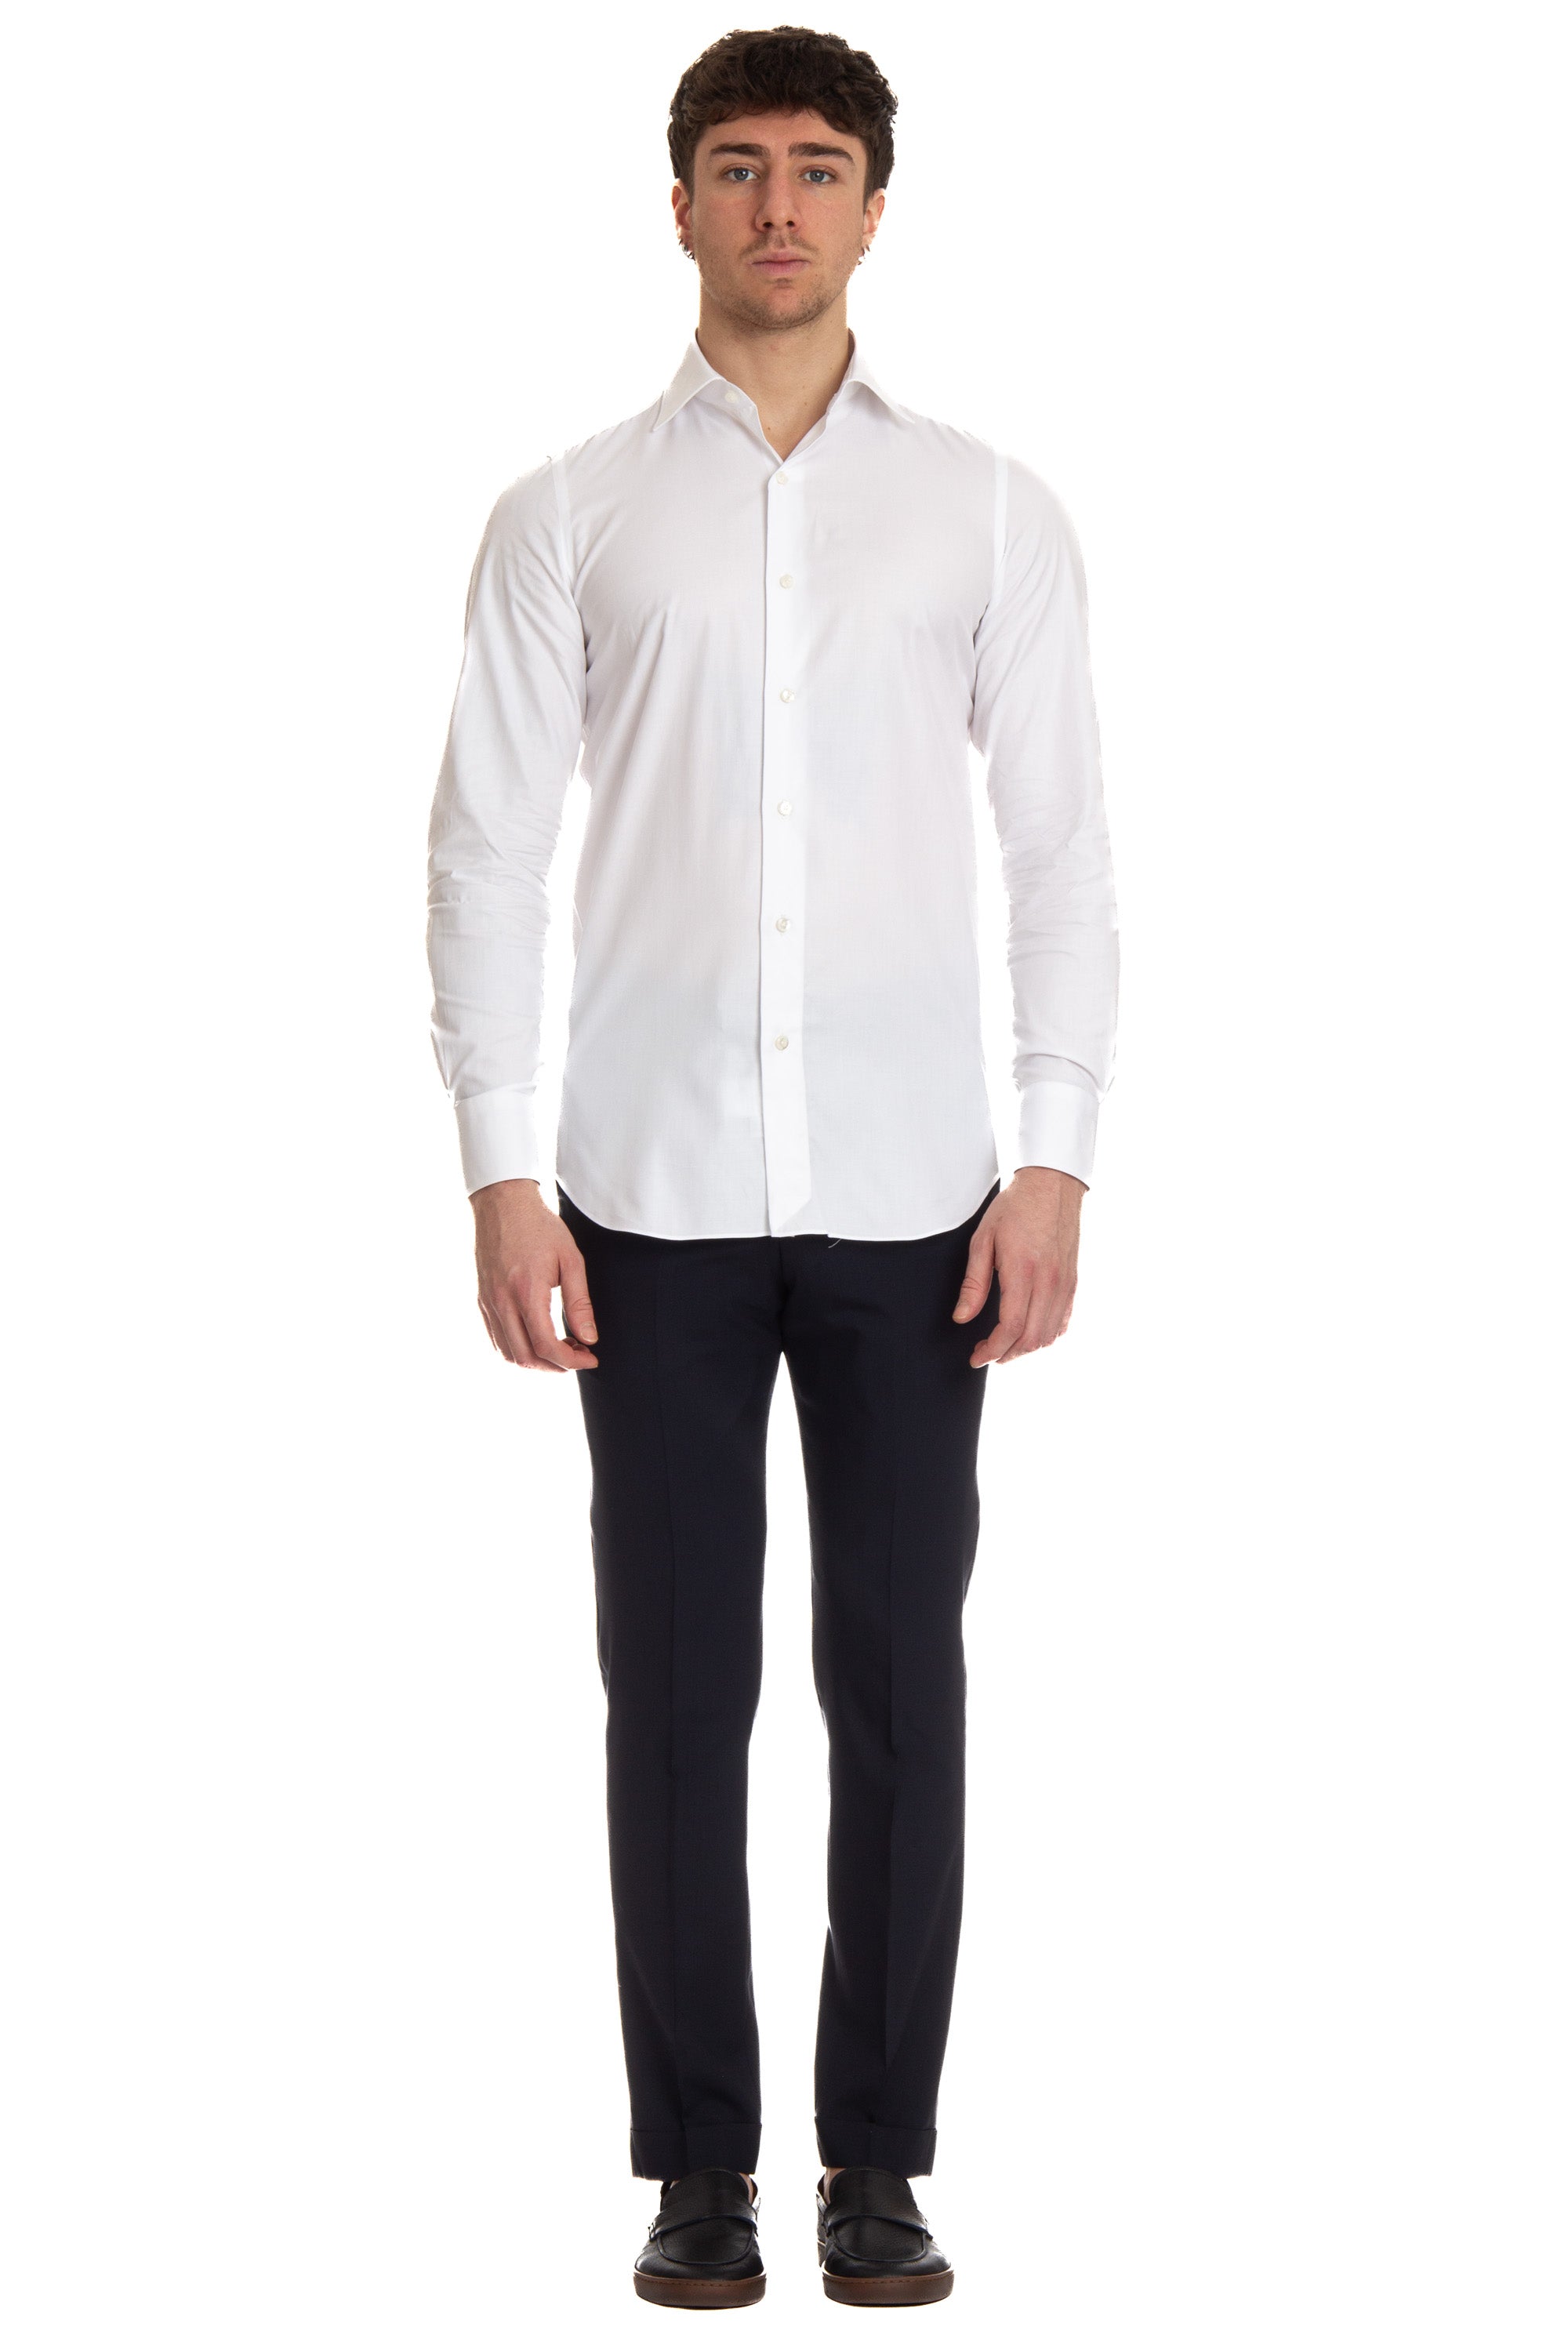 Tailored oxford shirt from the Milan line